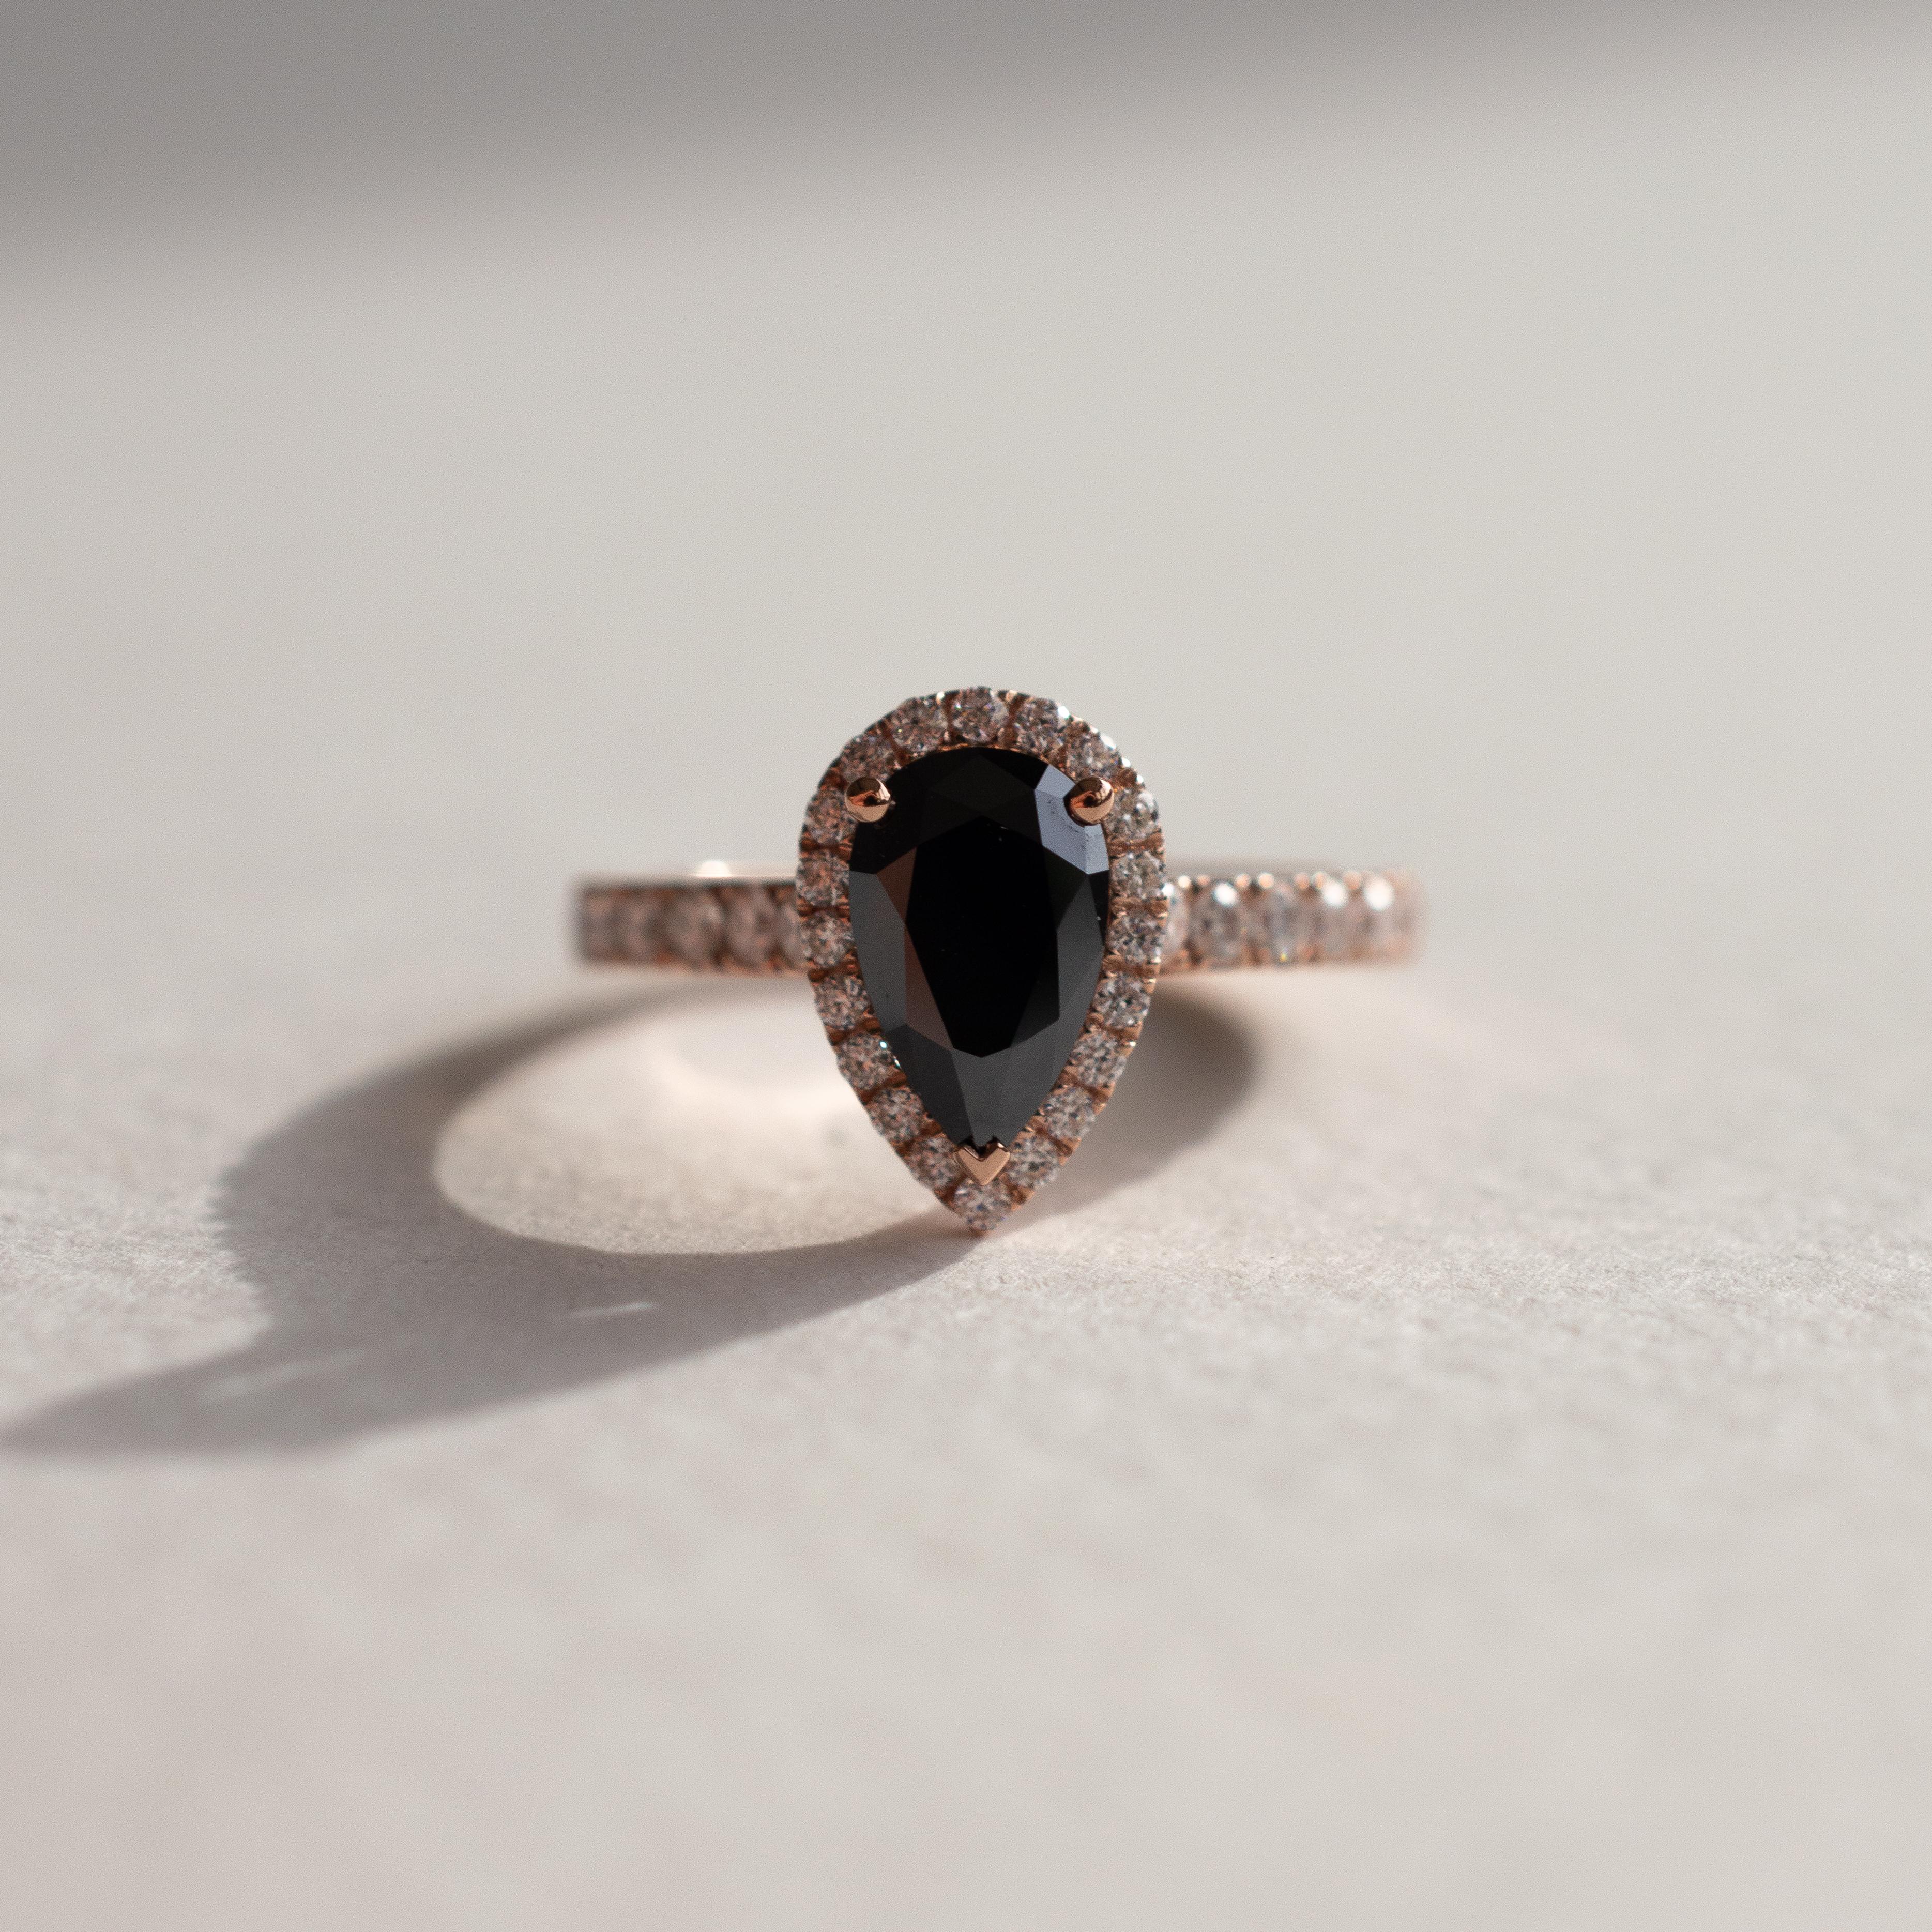 1.5 carat equivalent black moissanite in a yellow gold band with pave diamonds.